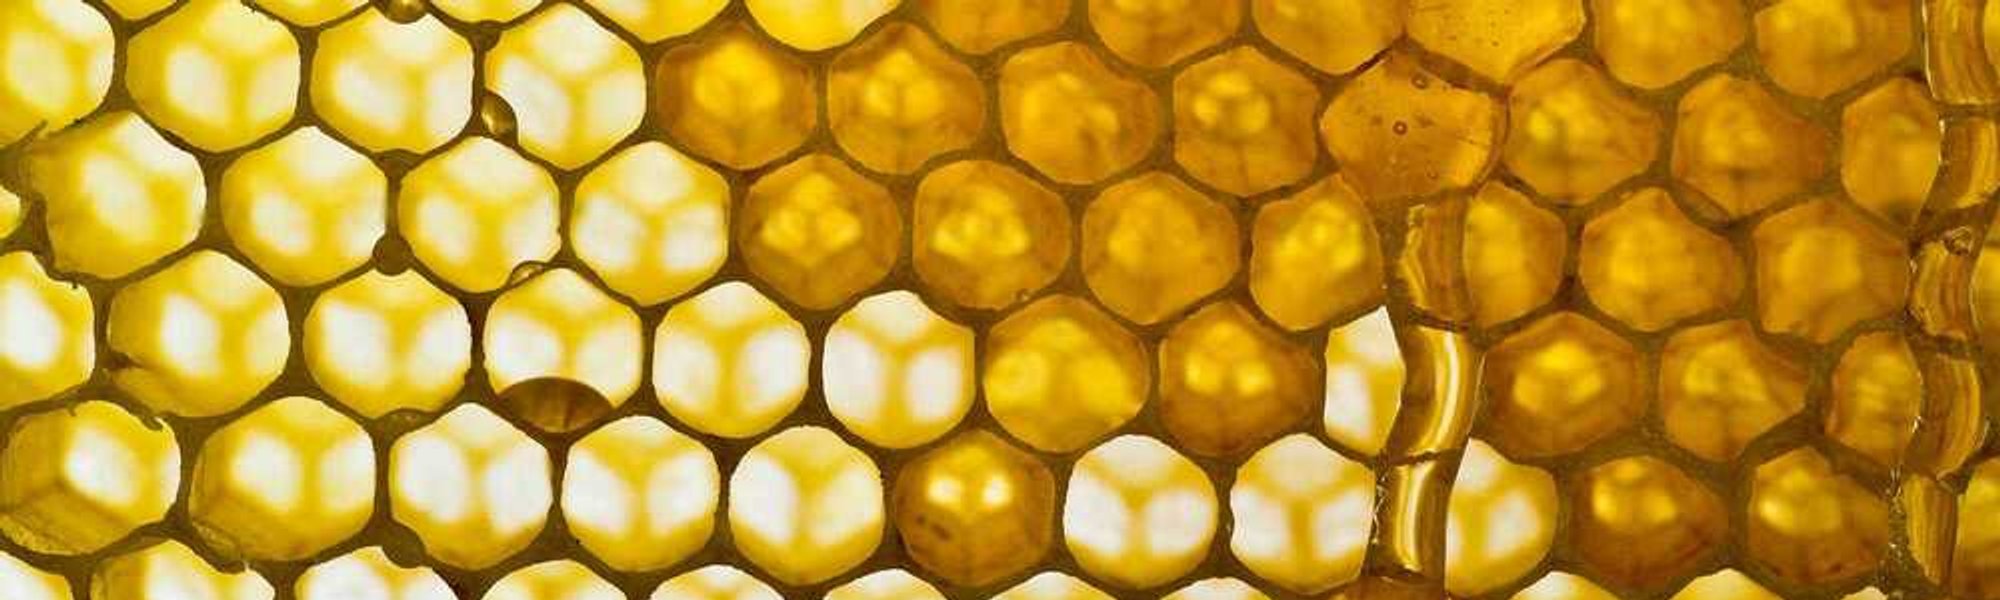 We Reveal The Benefits Of Royal Jelly For The Skin